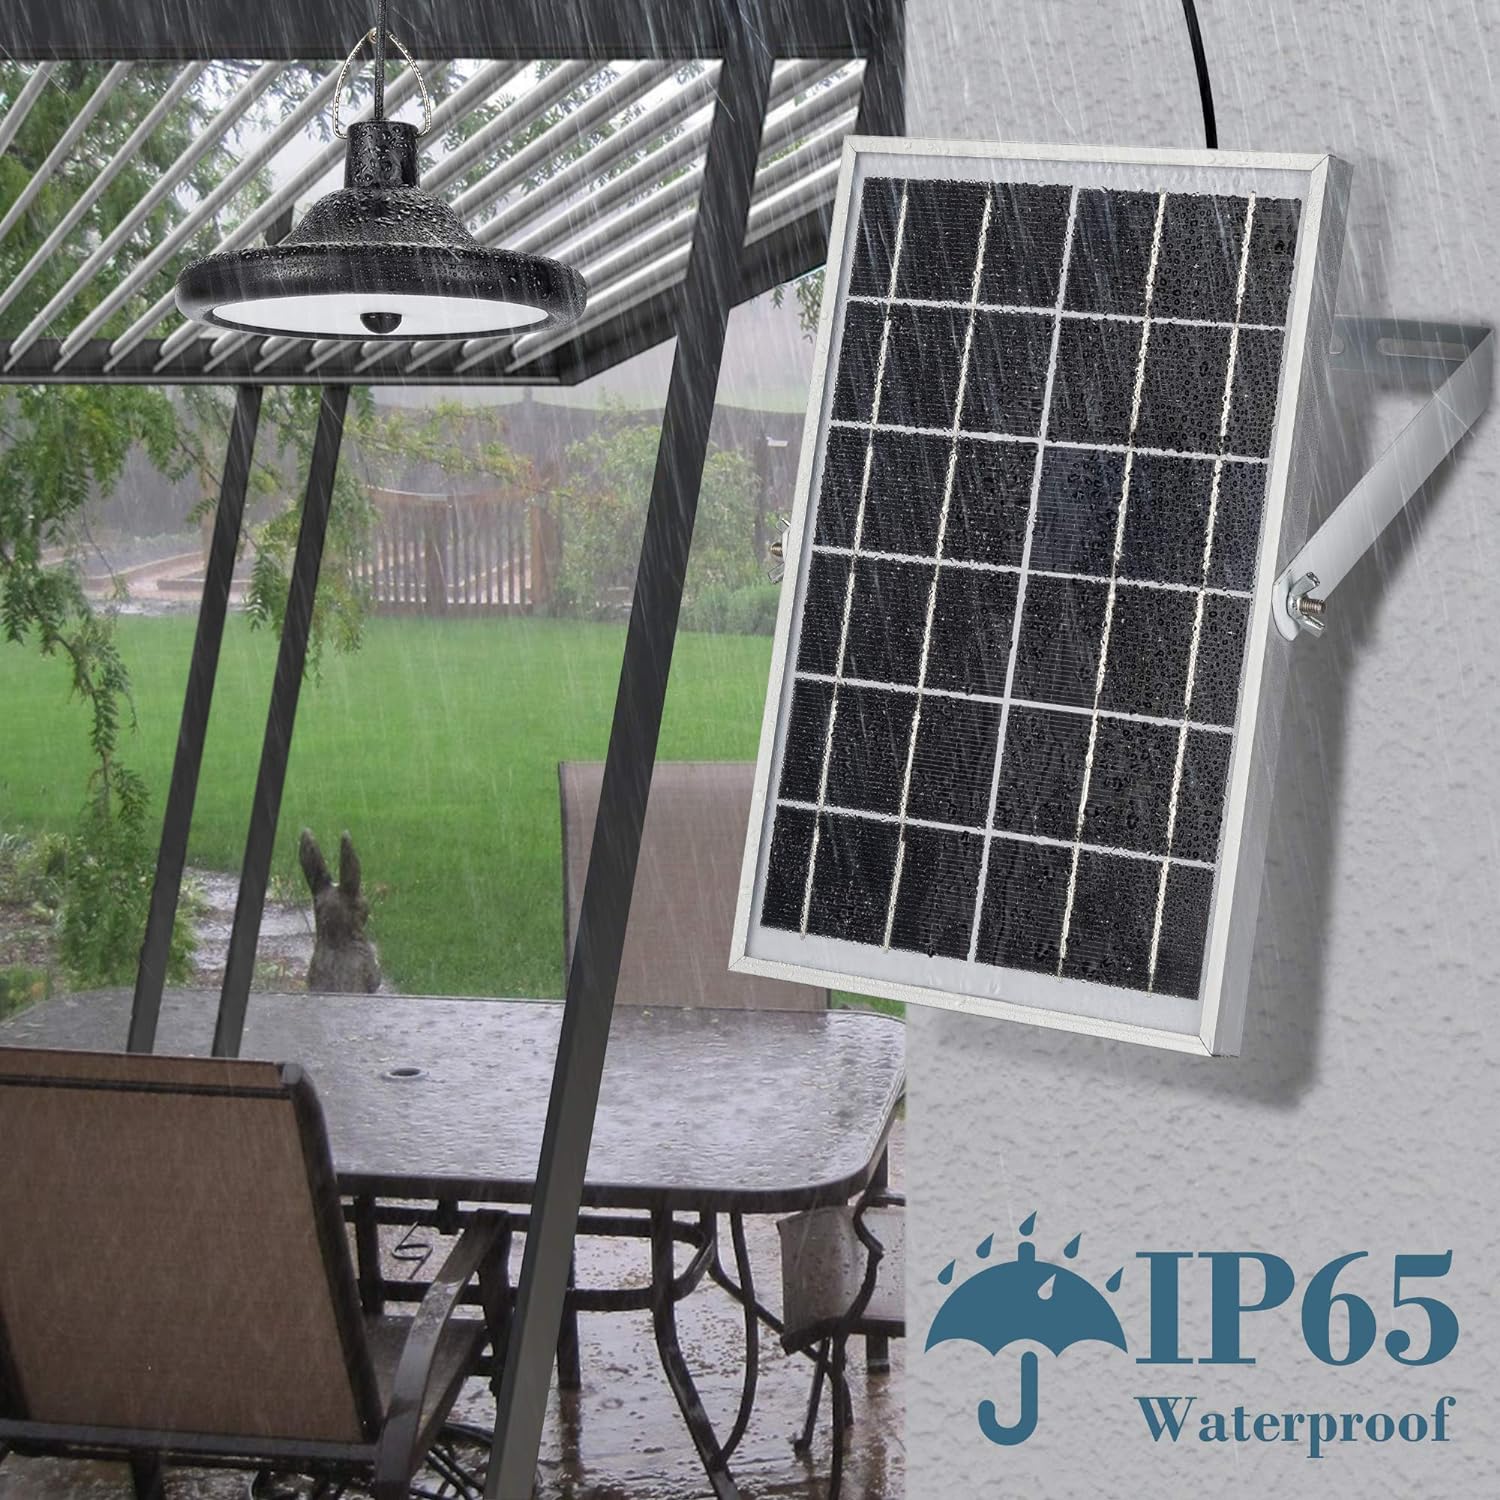 JACKYLED Upgraded Double Head Solar Pendant Light Motion Sensor  IP65 Waterproof Outdoor LED Shed Light with Dimmable Remote Control 16.